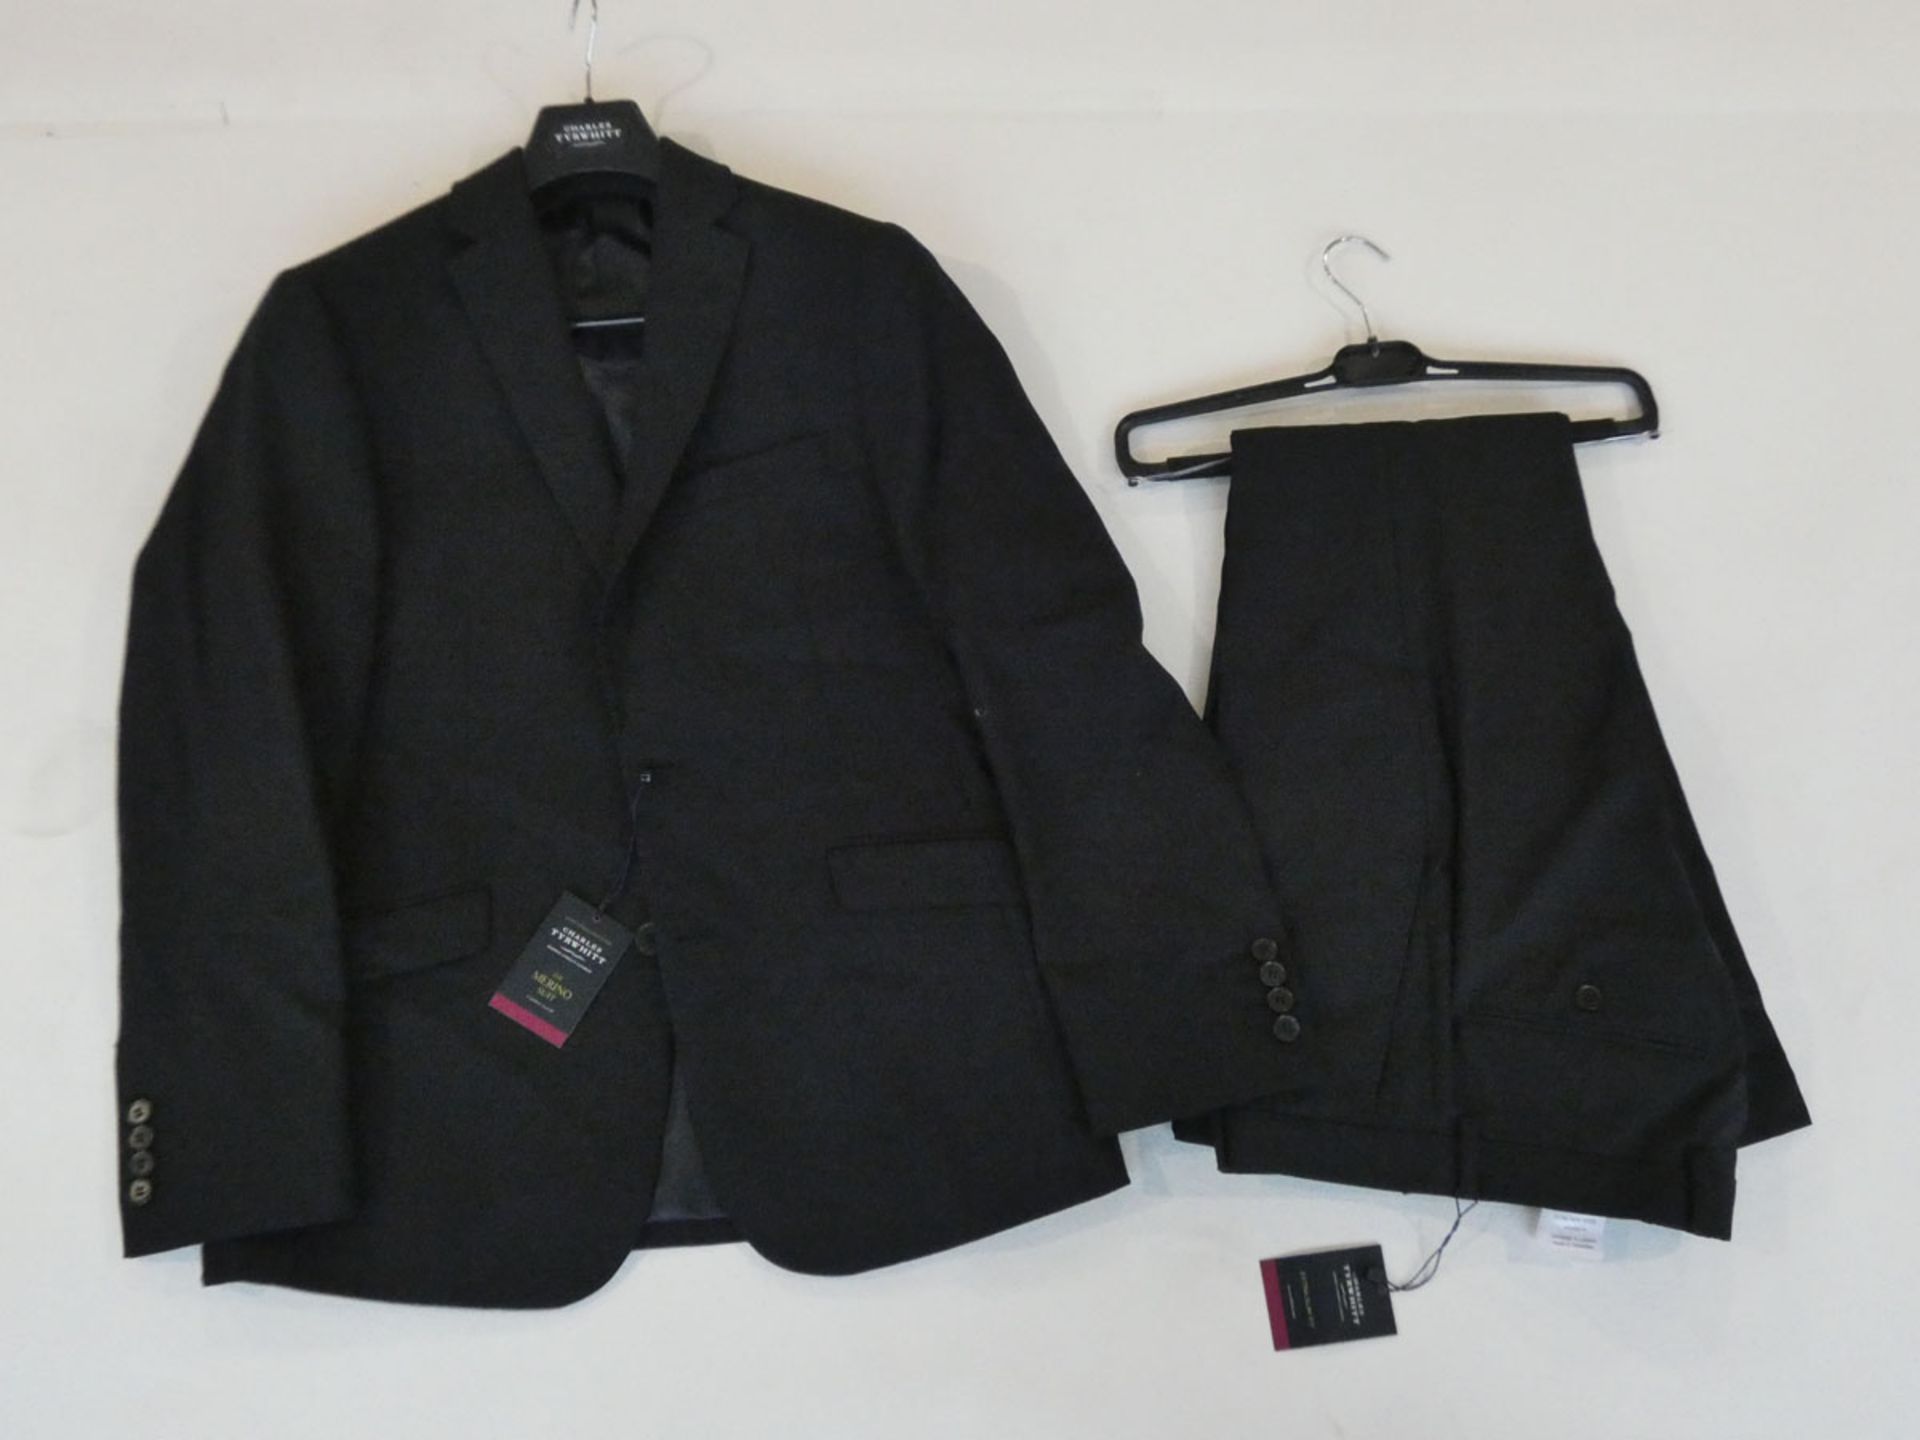 Charles Tyrwhitt the merino suit midnight extra slim fit jacket size 38S and trouser size 3032 set